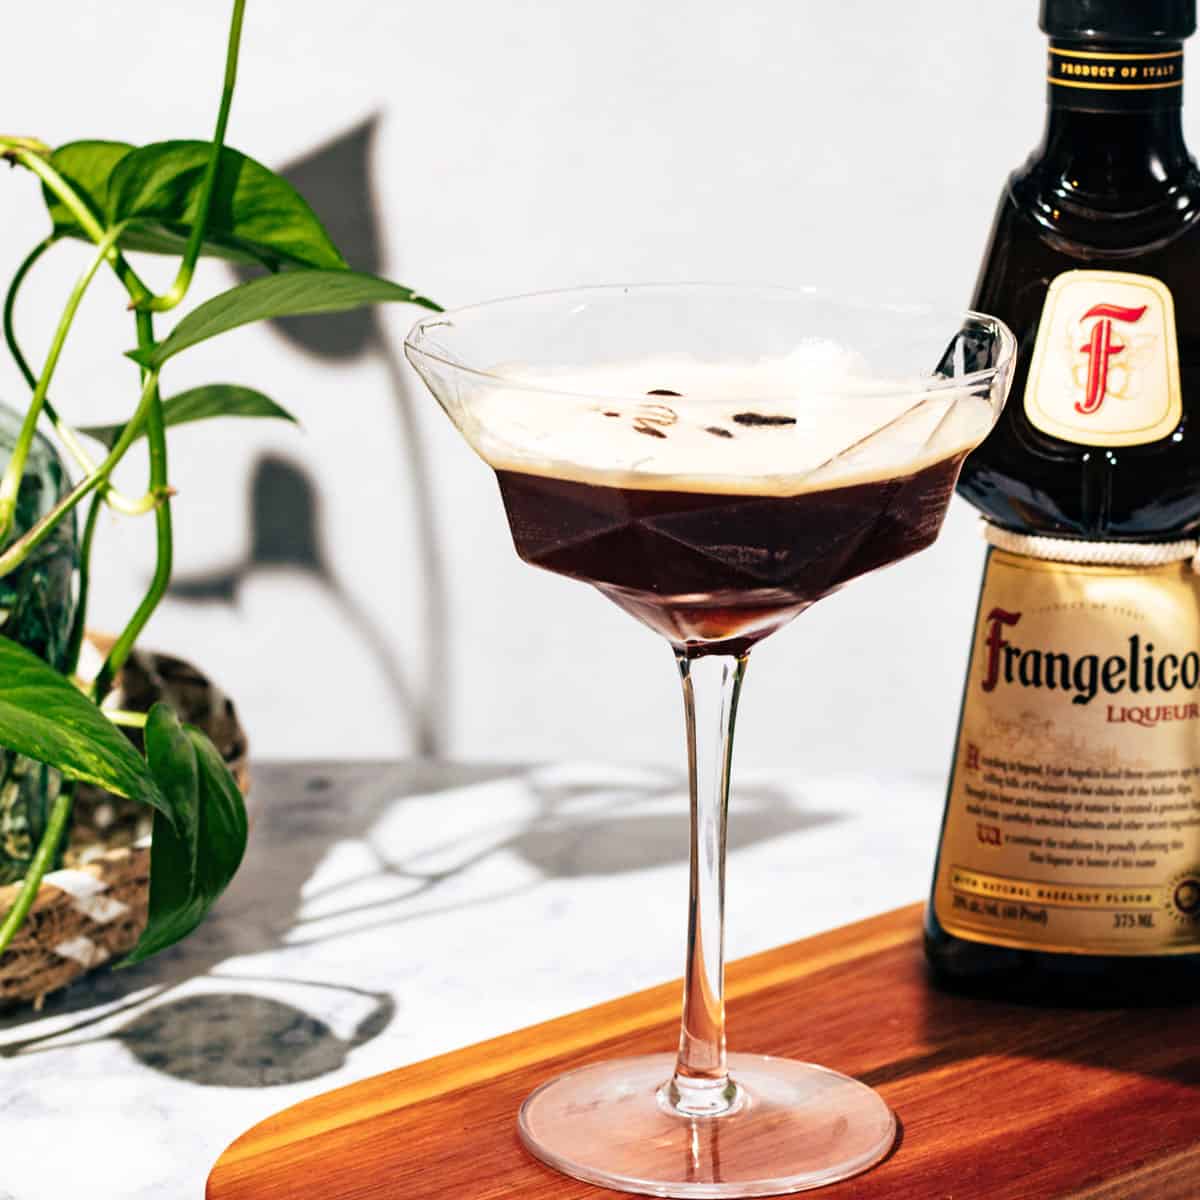 Espresso martini with a bottle of Frangelico in the background.